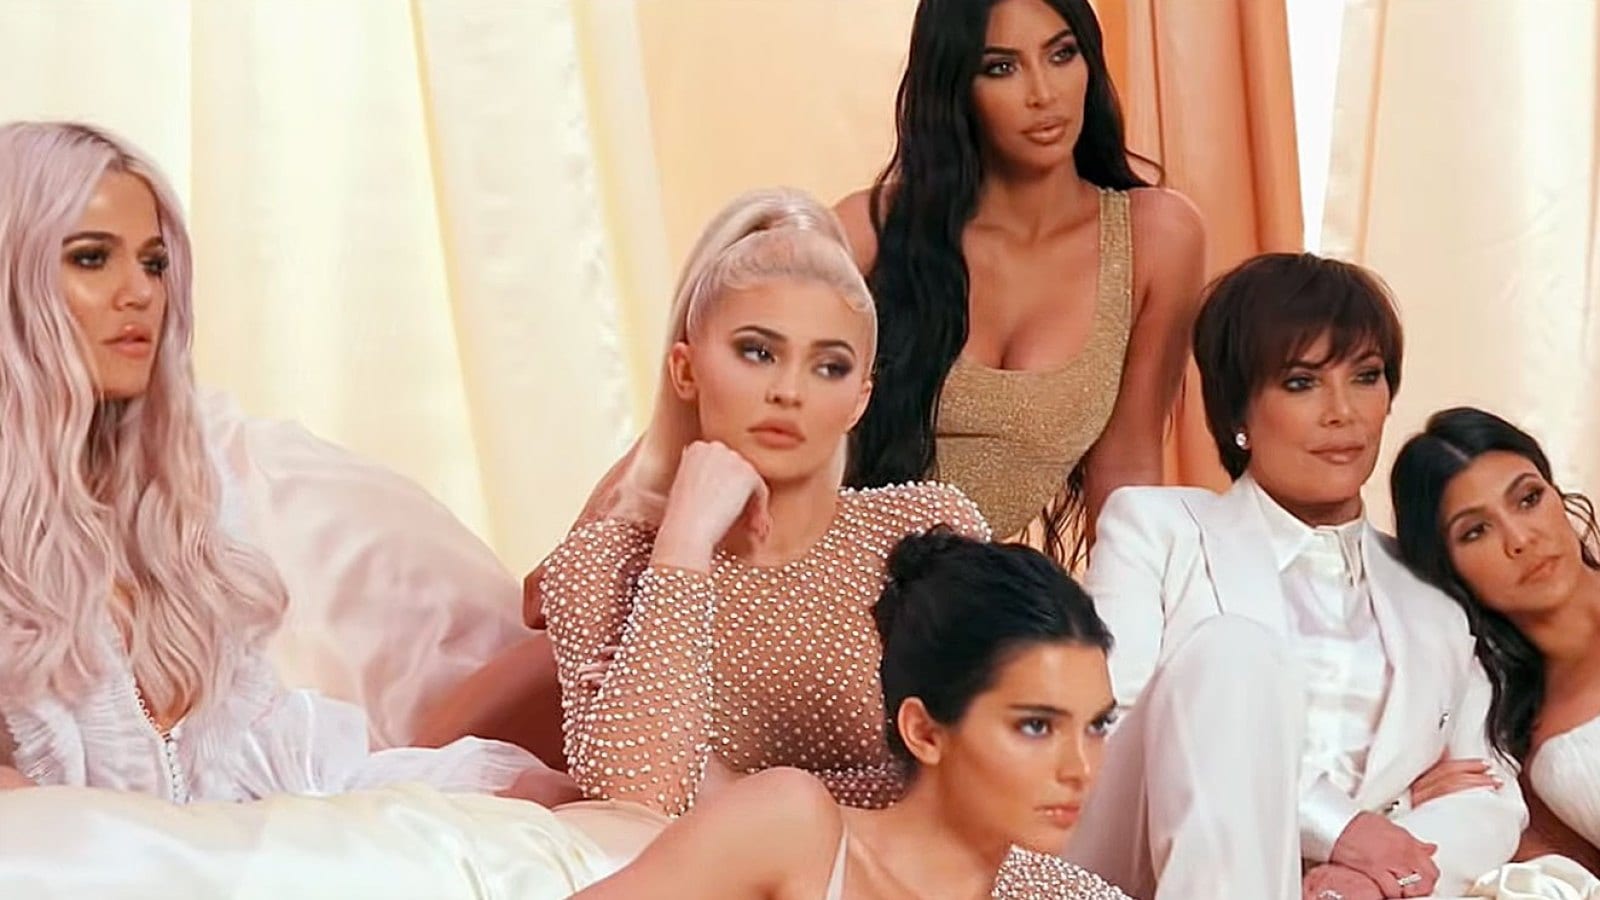 the Kardashians Season 16 Episode 5 Watch Keeping Up With the...